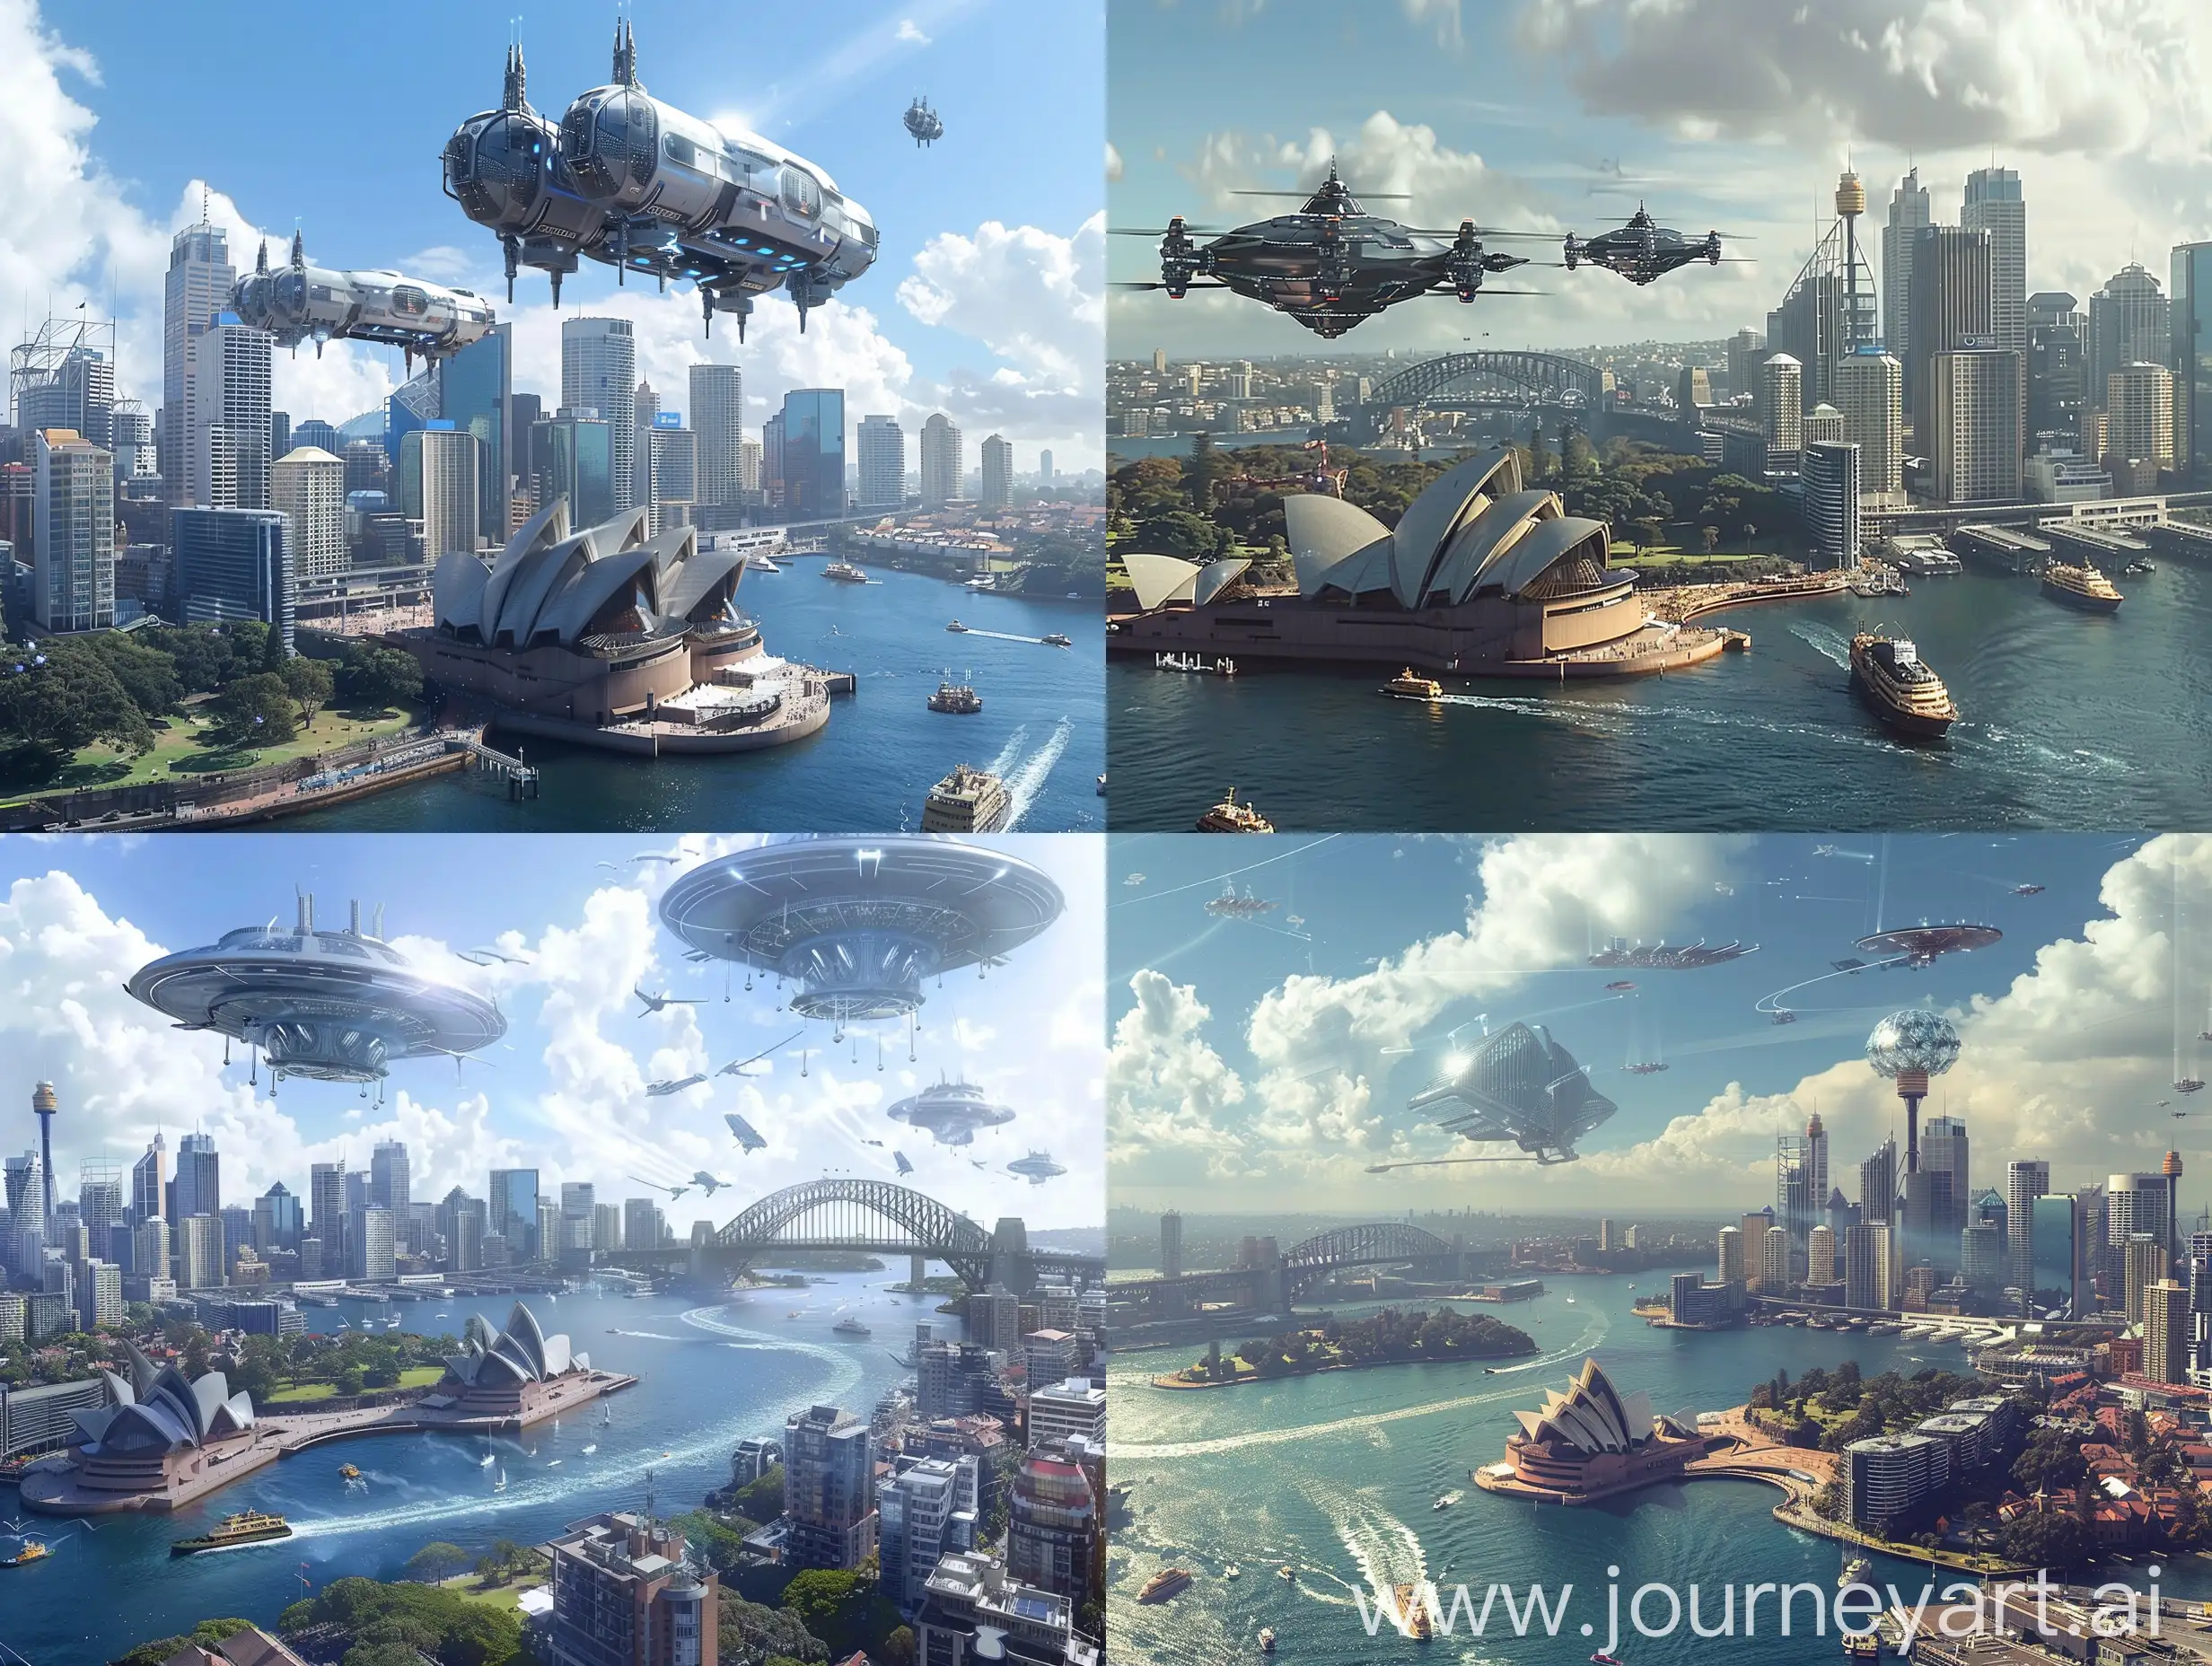 Futuristic-Coastal-Cityscape-Sydney-in-3000-with-AI-Governance-and-Air-Transportation